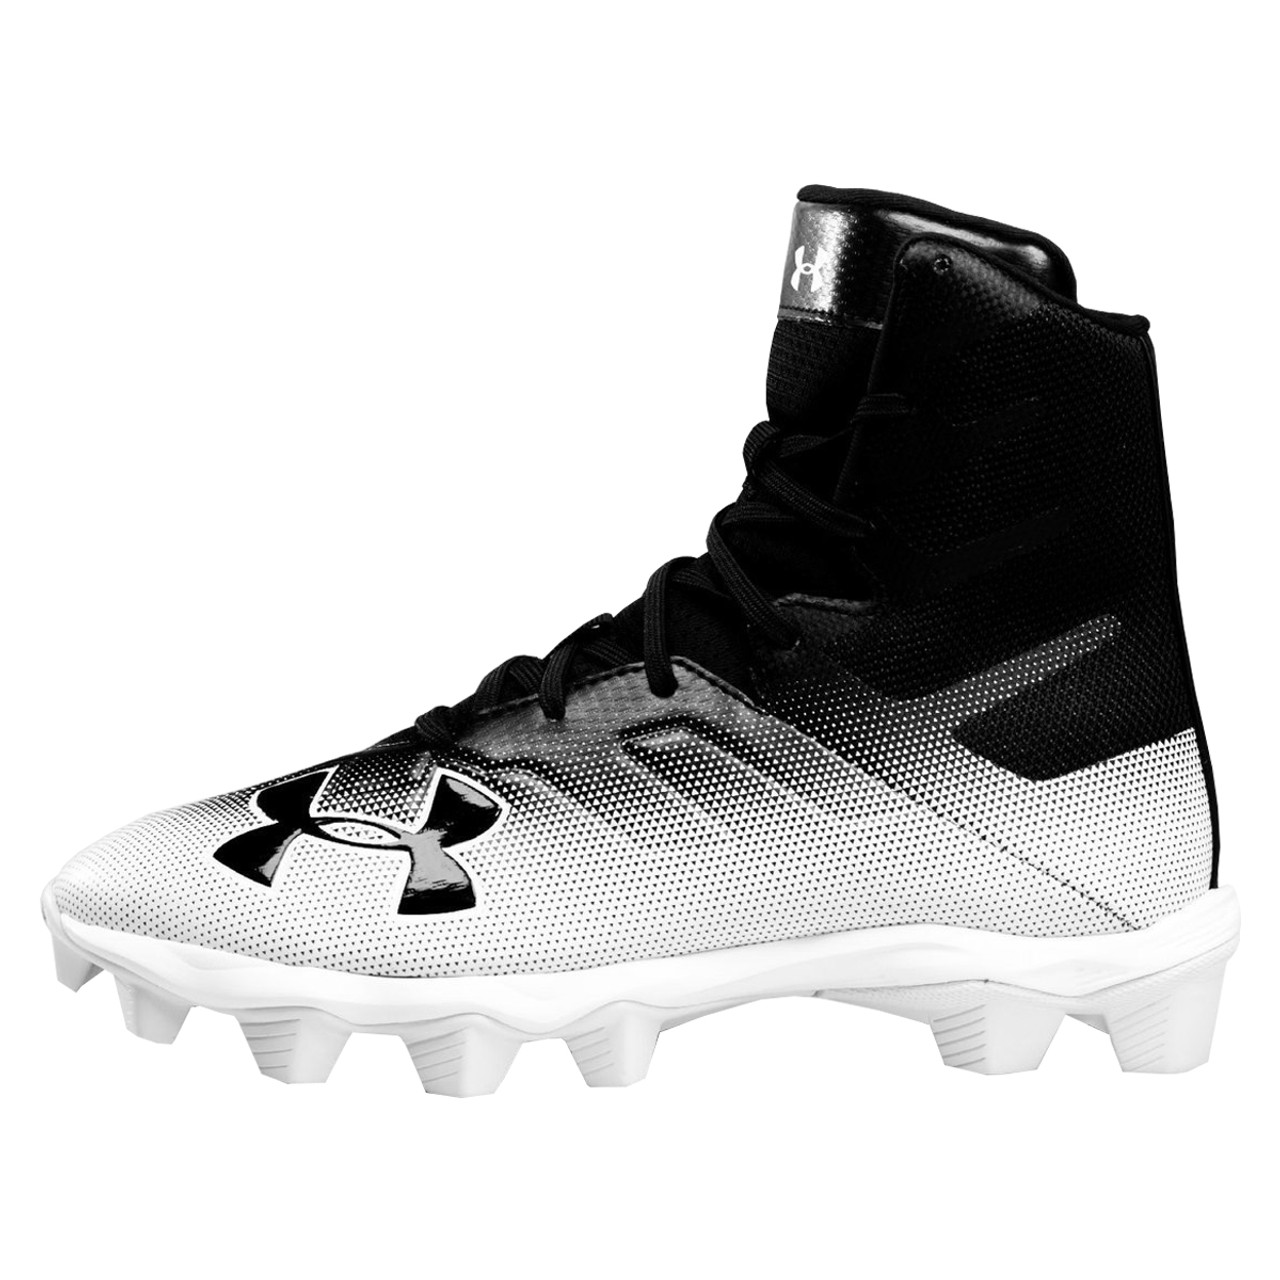 best under armour football cleats